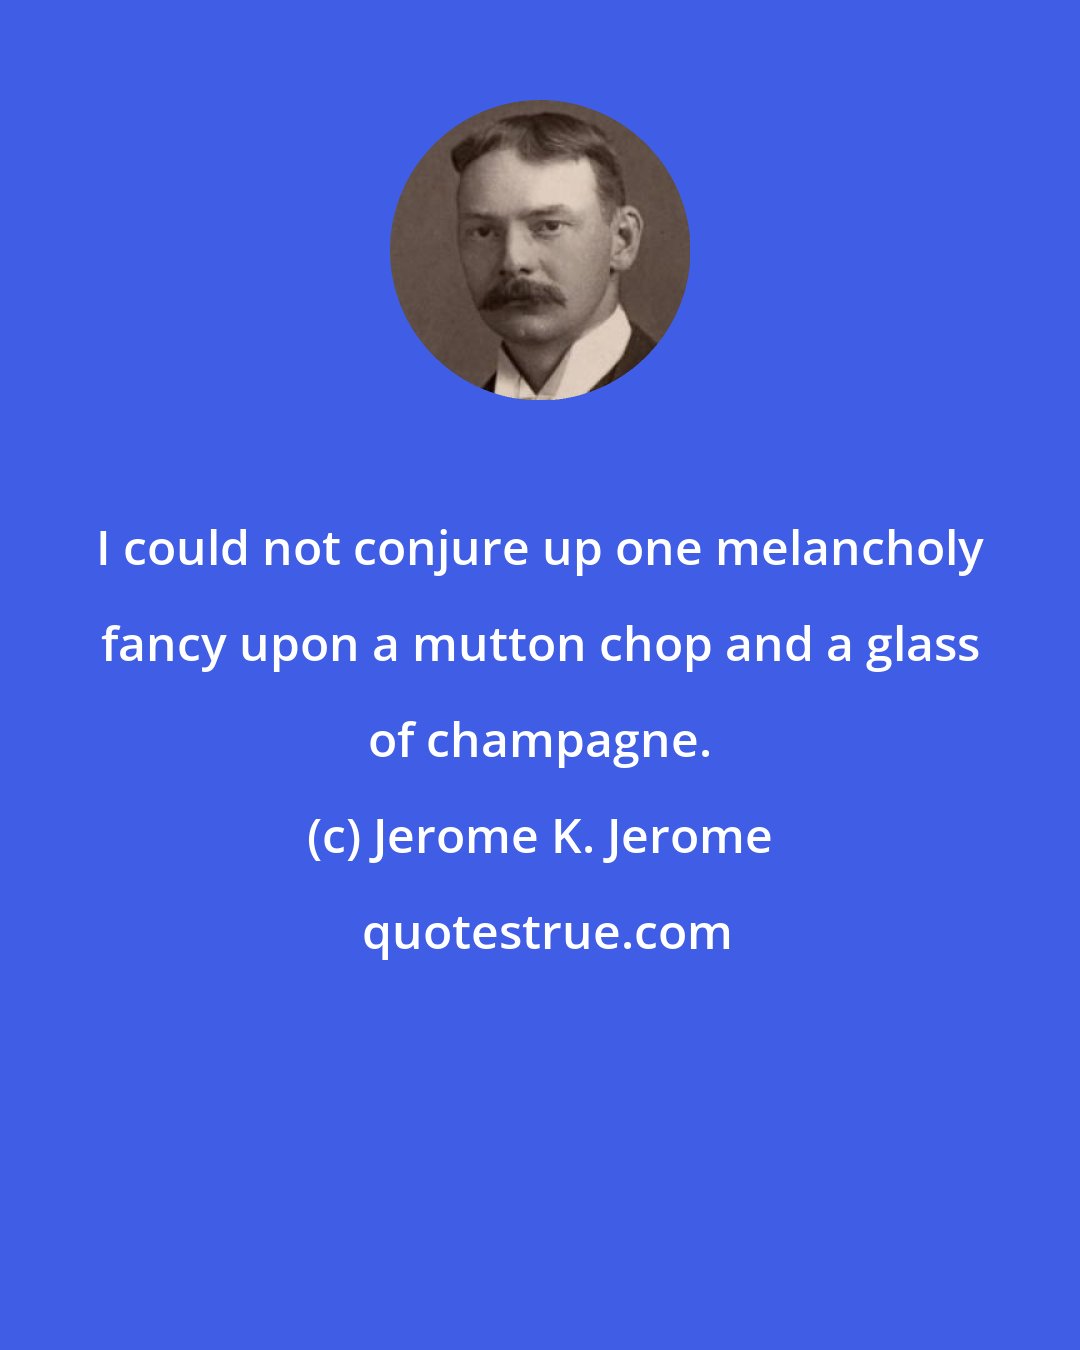 Jerome K. Jerome: I could not conjure up one melancholy fancy upon a mutton chop and a glass of champagne.